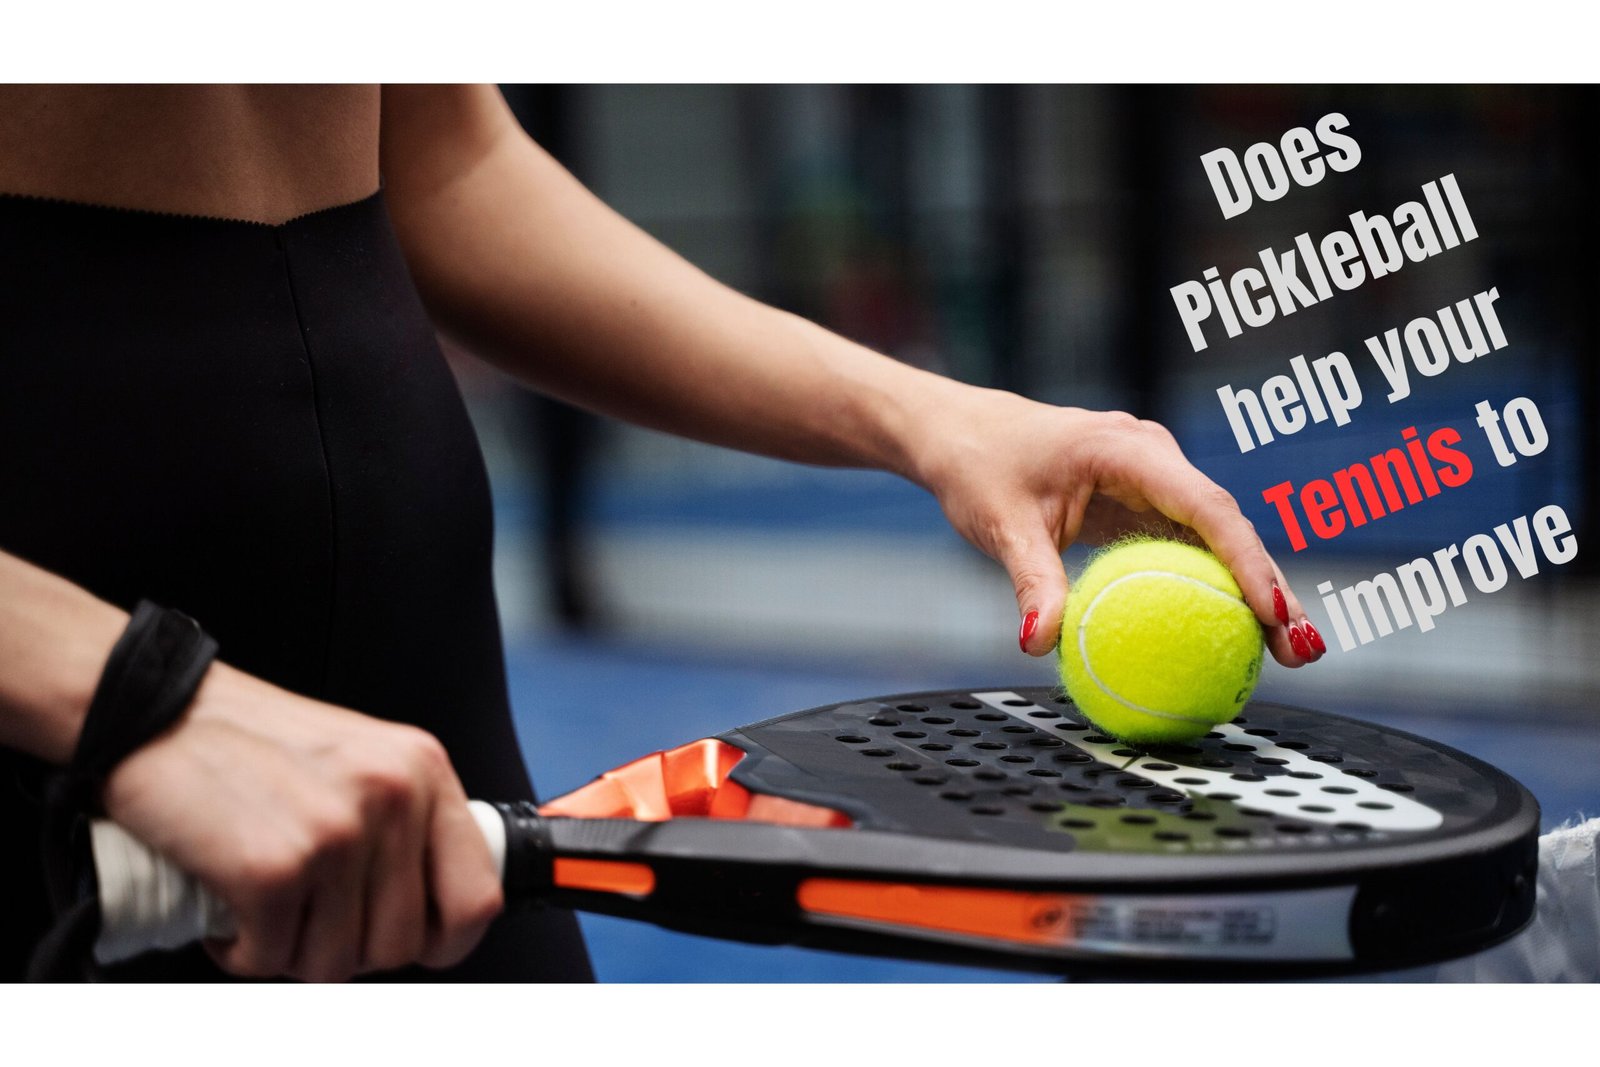 does pickleball help your tennis to improve